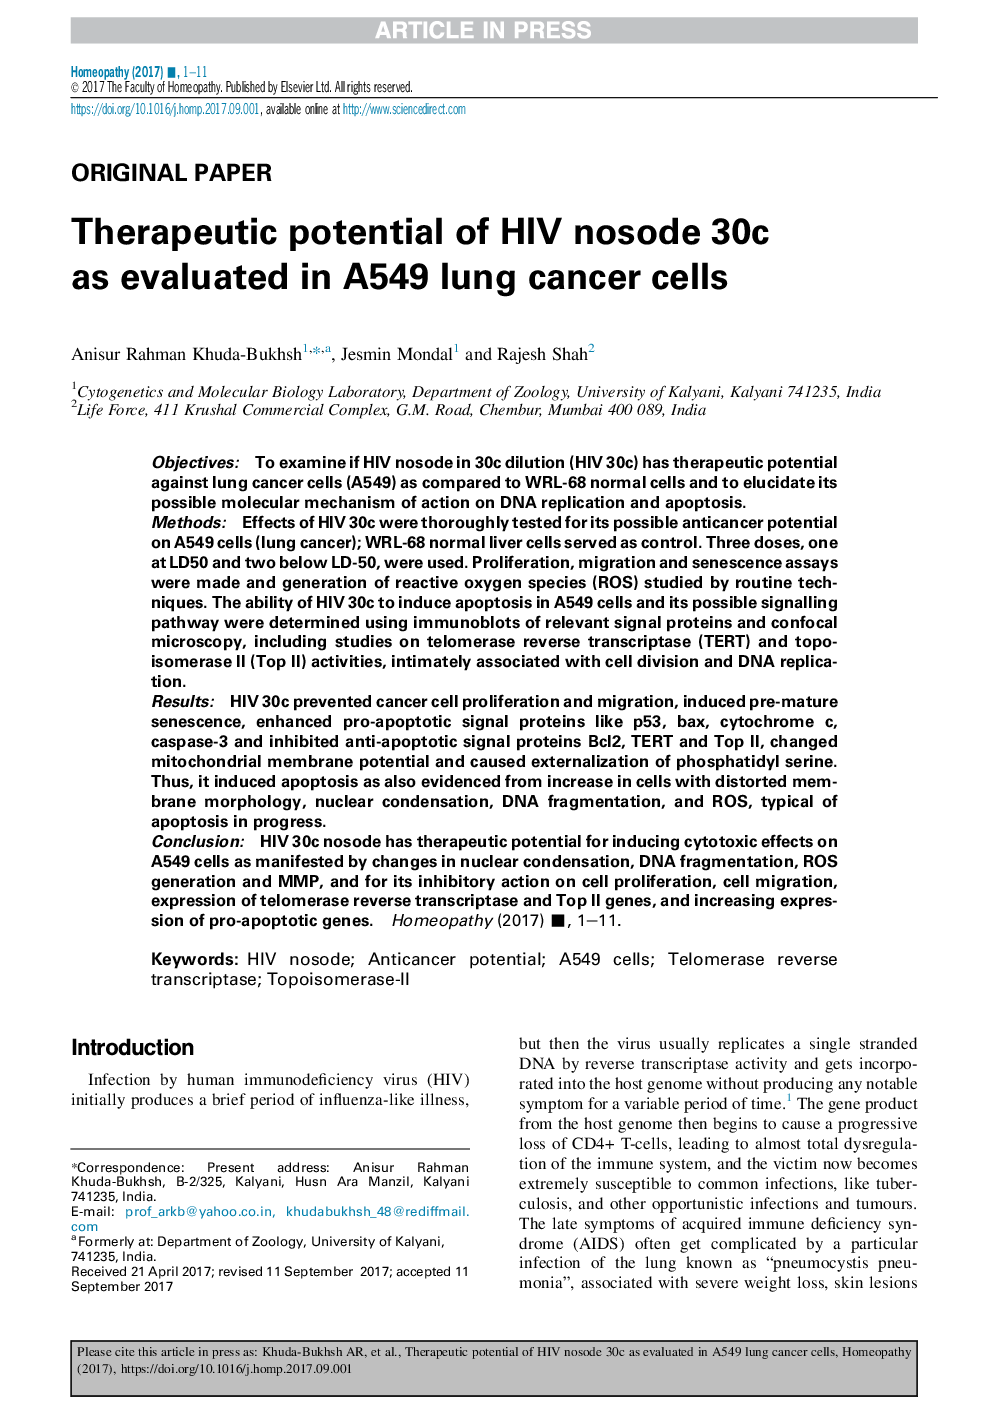 Therapeutic potential of HIV nosode 30c as evaluated in A549 lung cancer cells